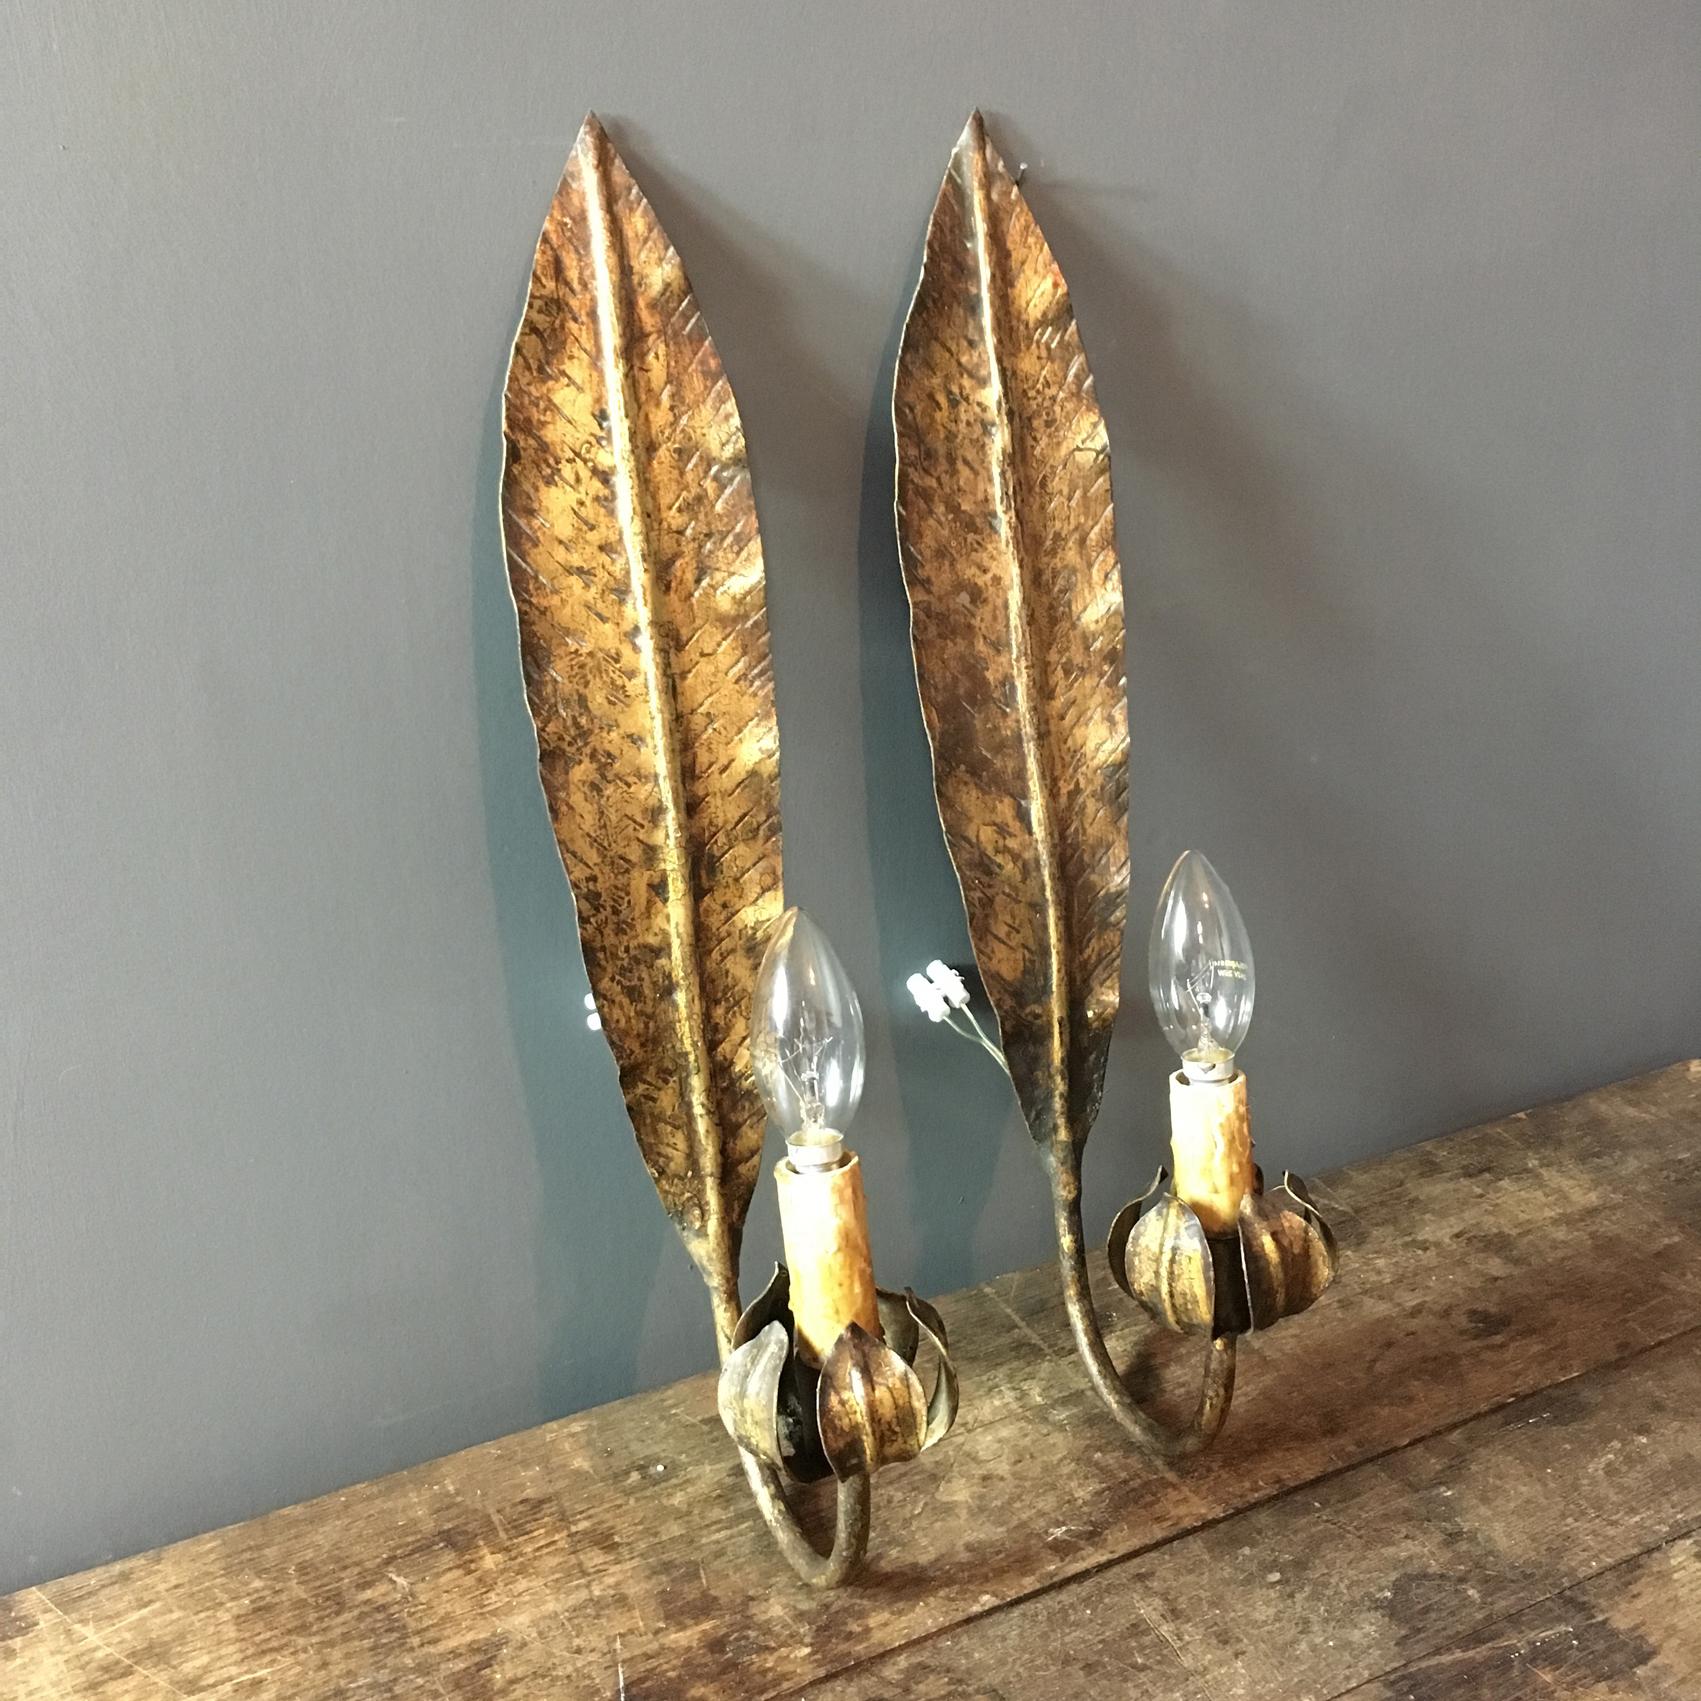 Beautiful understated vintage Italian leaf wall lights

Handcrafted leaf shaped design with simple flower bud shaped bulb holder

Gilt metal

Each sconce takes an e14 screw in bulb

The lights have simple hook fixings on the back


The